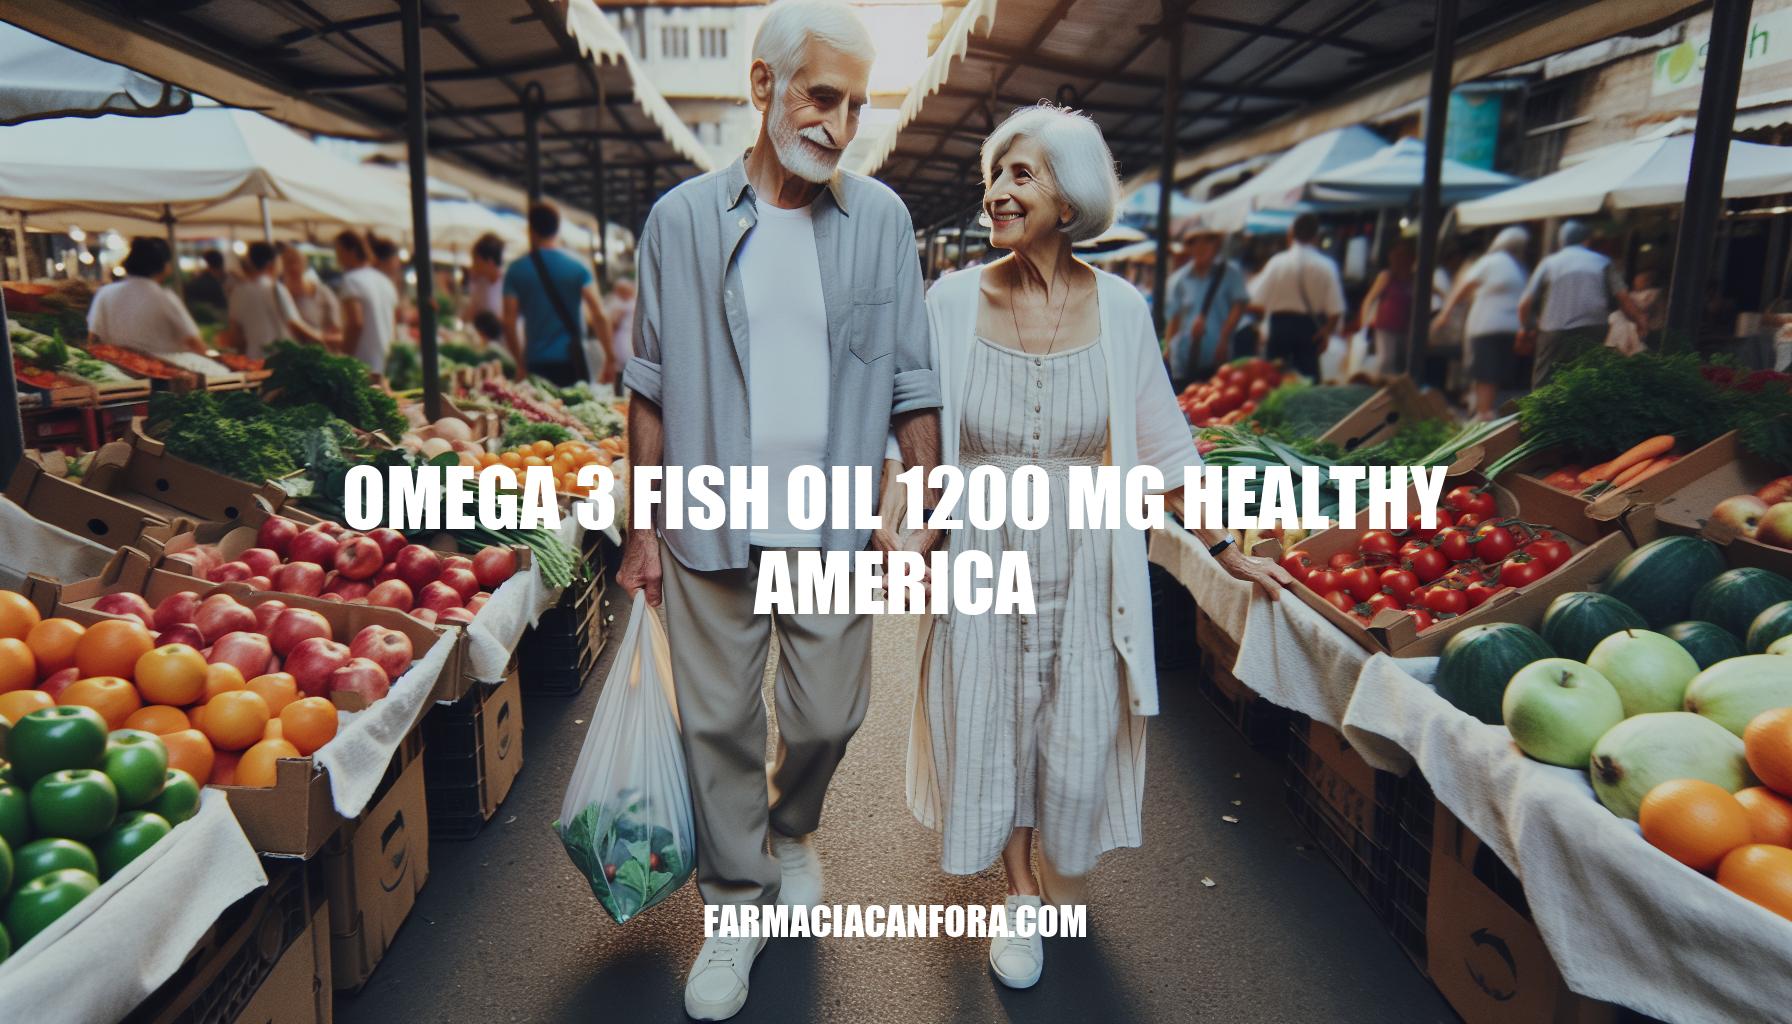 The Benefits of Omega-3 Fish Oil 1200 mg for a Healthy America